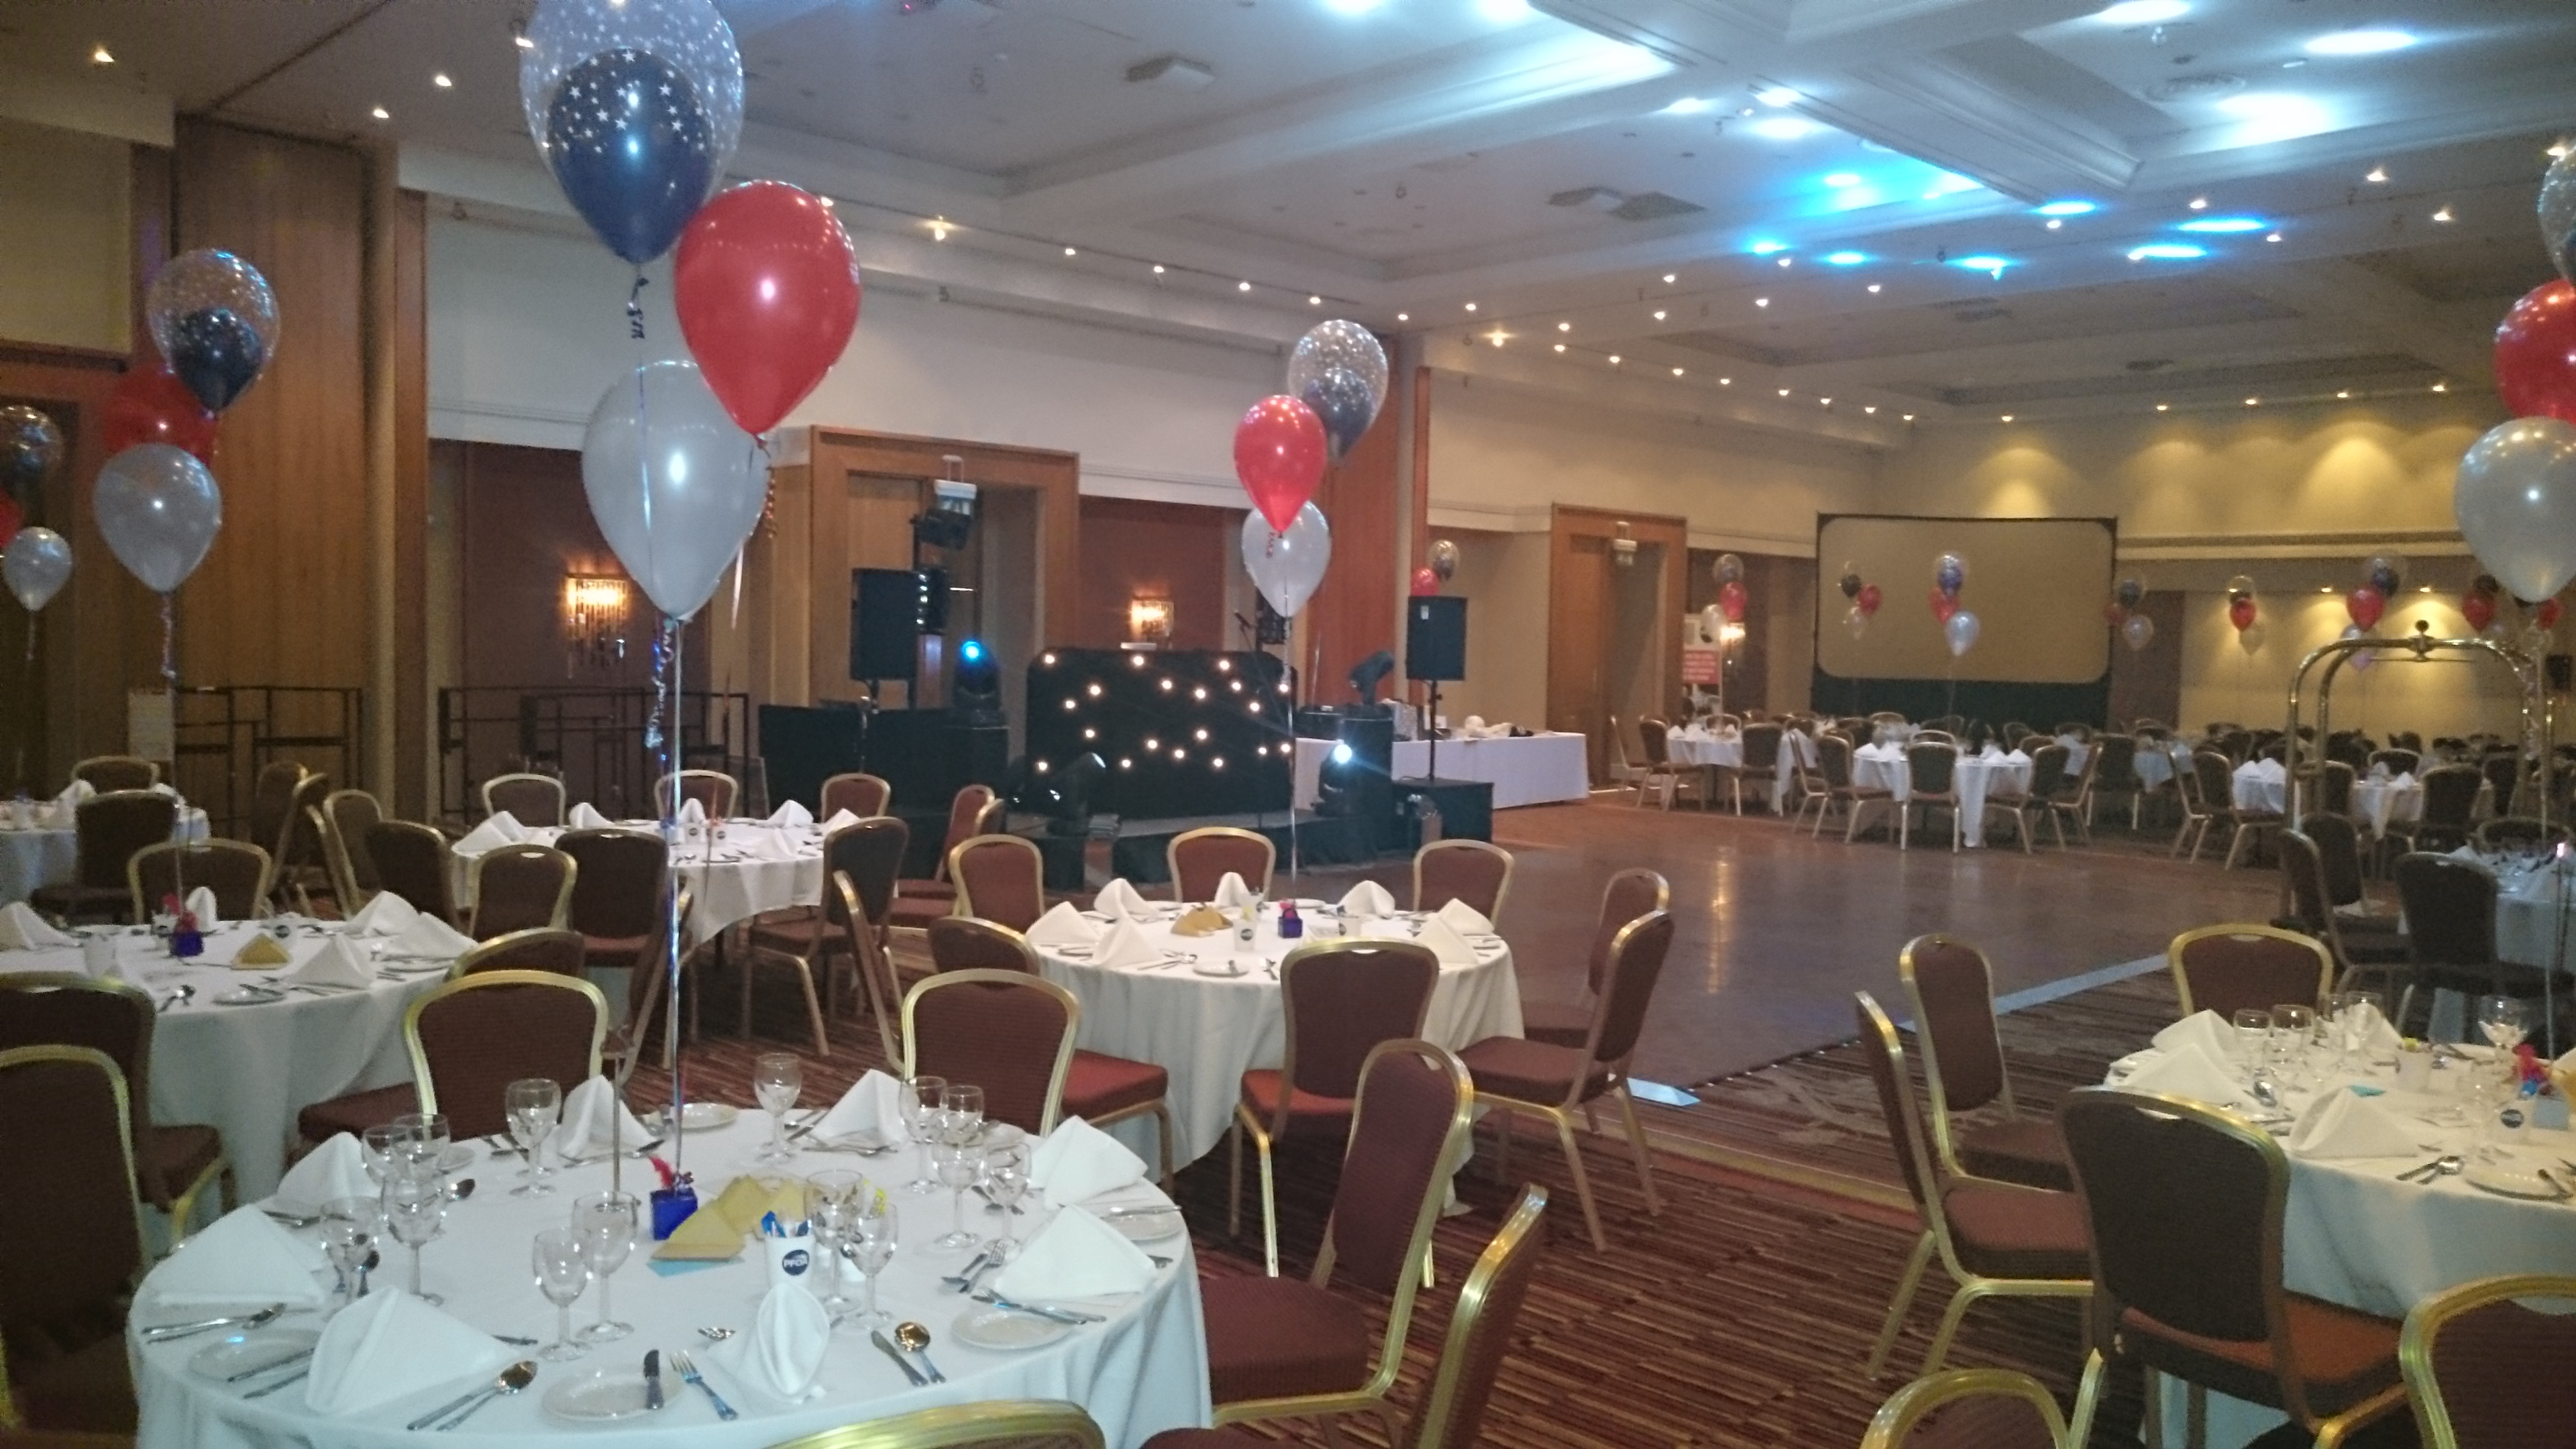 You are currently viewing Large Corporate event at Chesford Grange Kenilworth.